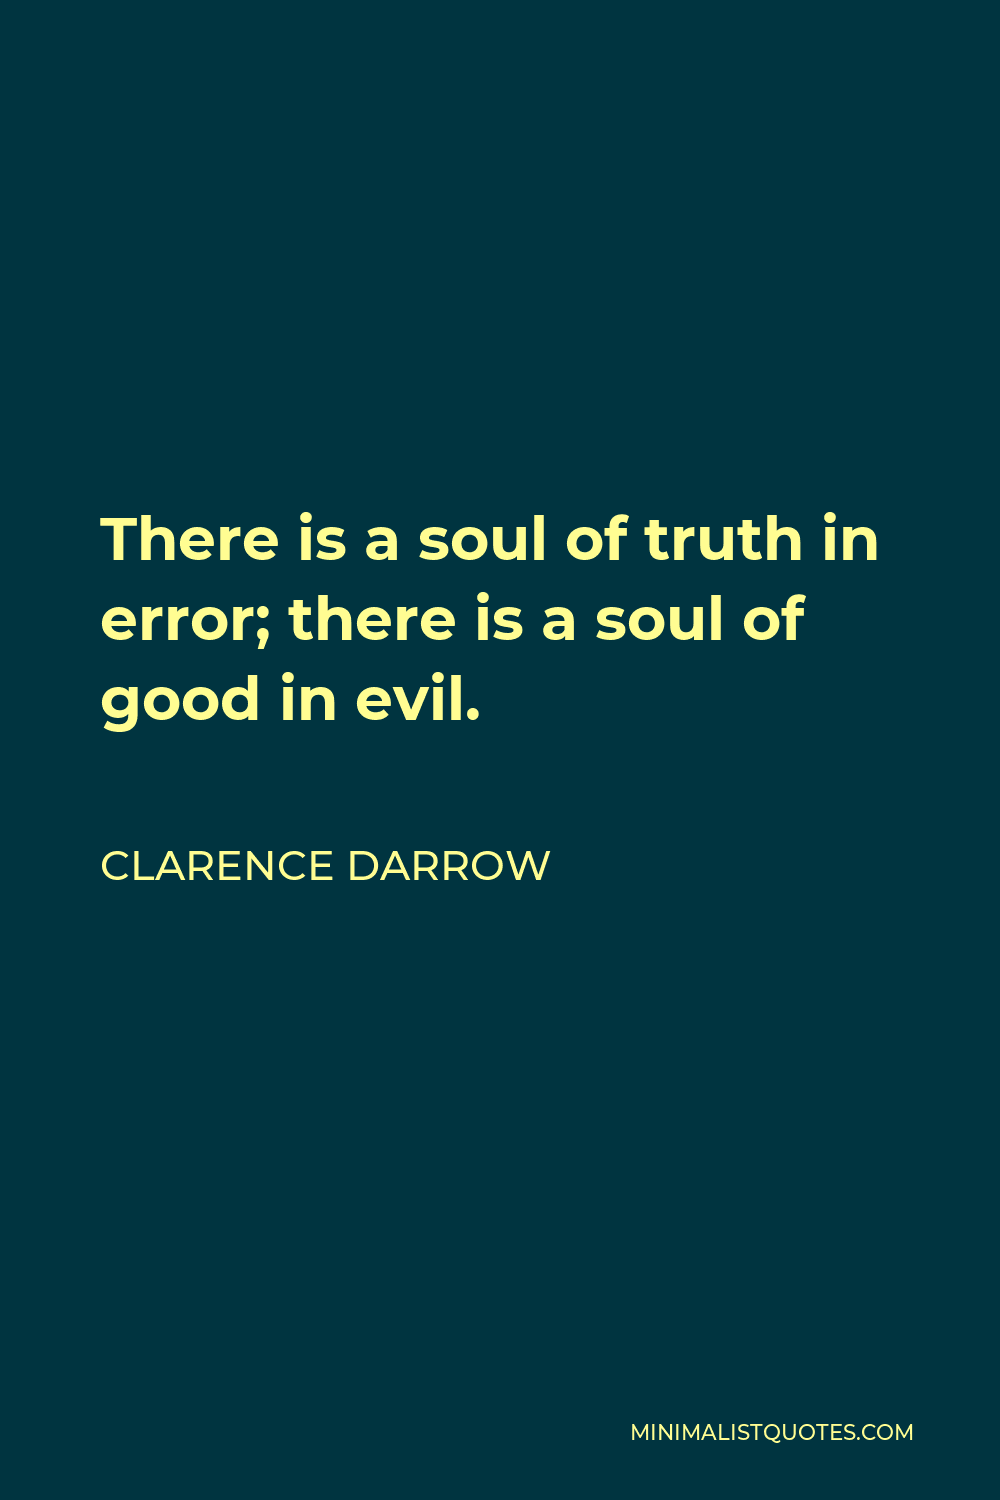 Clarence Darrow Quote - There is a soul of truth in error; there is a soul of good in evil.